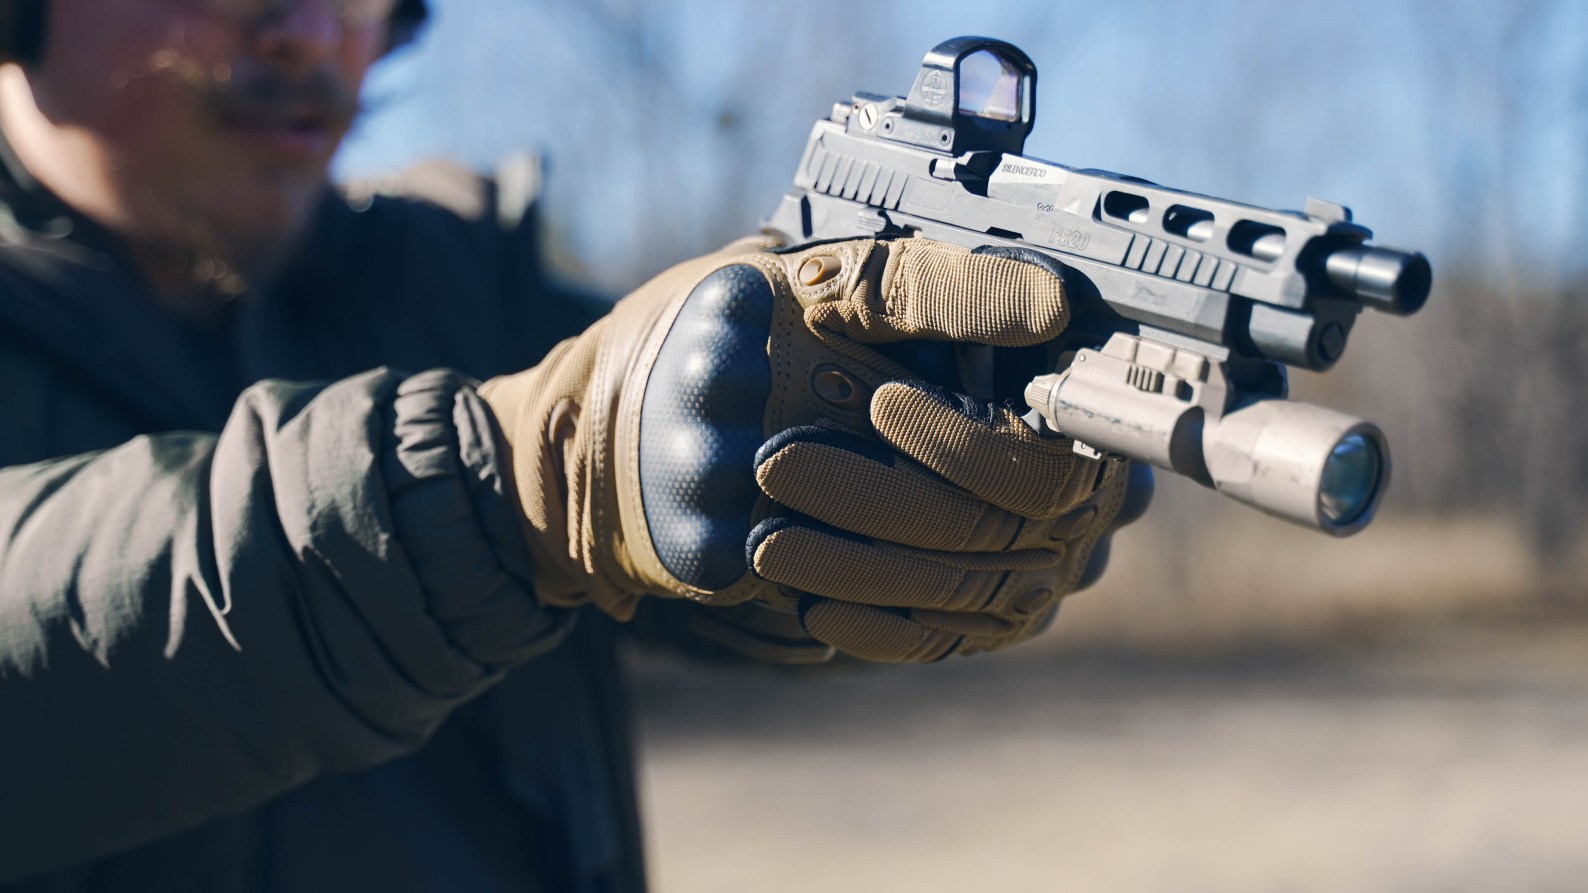 The author tested the best tactical gloves while shooting handguns and rifles.